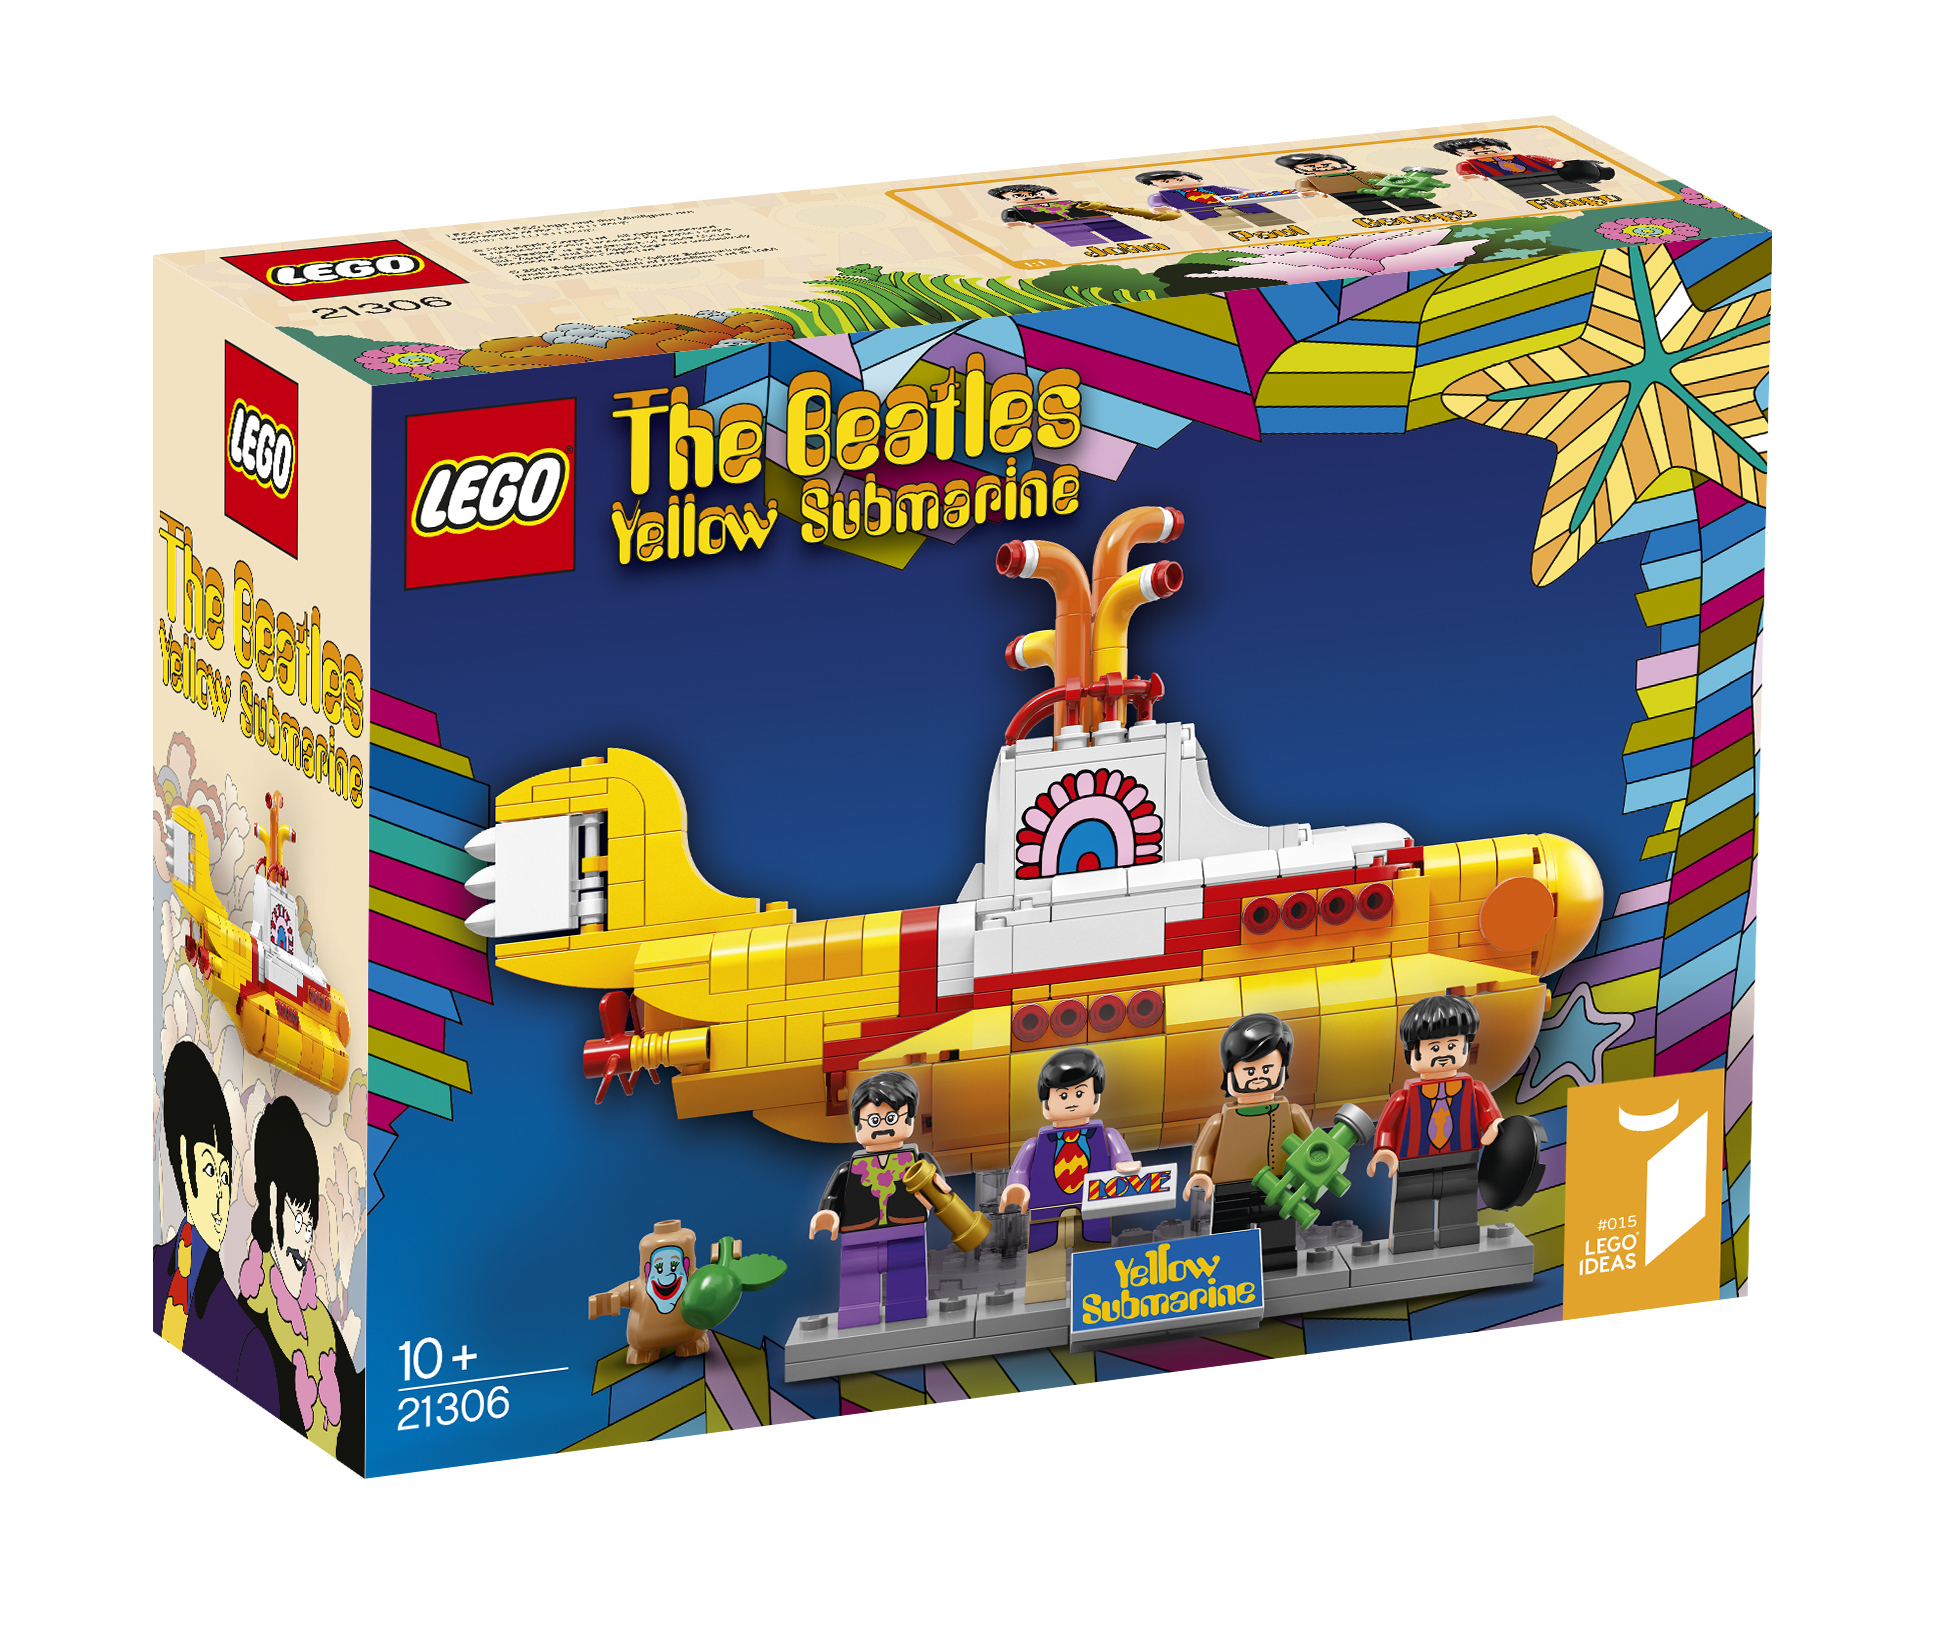 The Beatles Yellow Submarine LEGO set is the perfect combination of nostalgia and fun